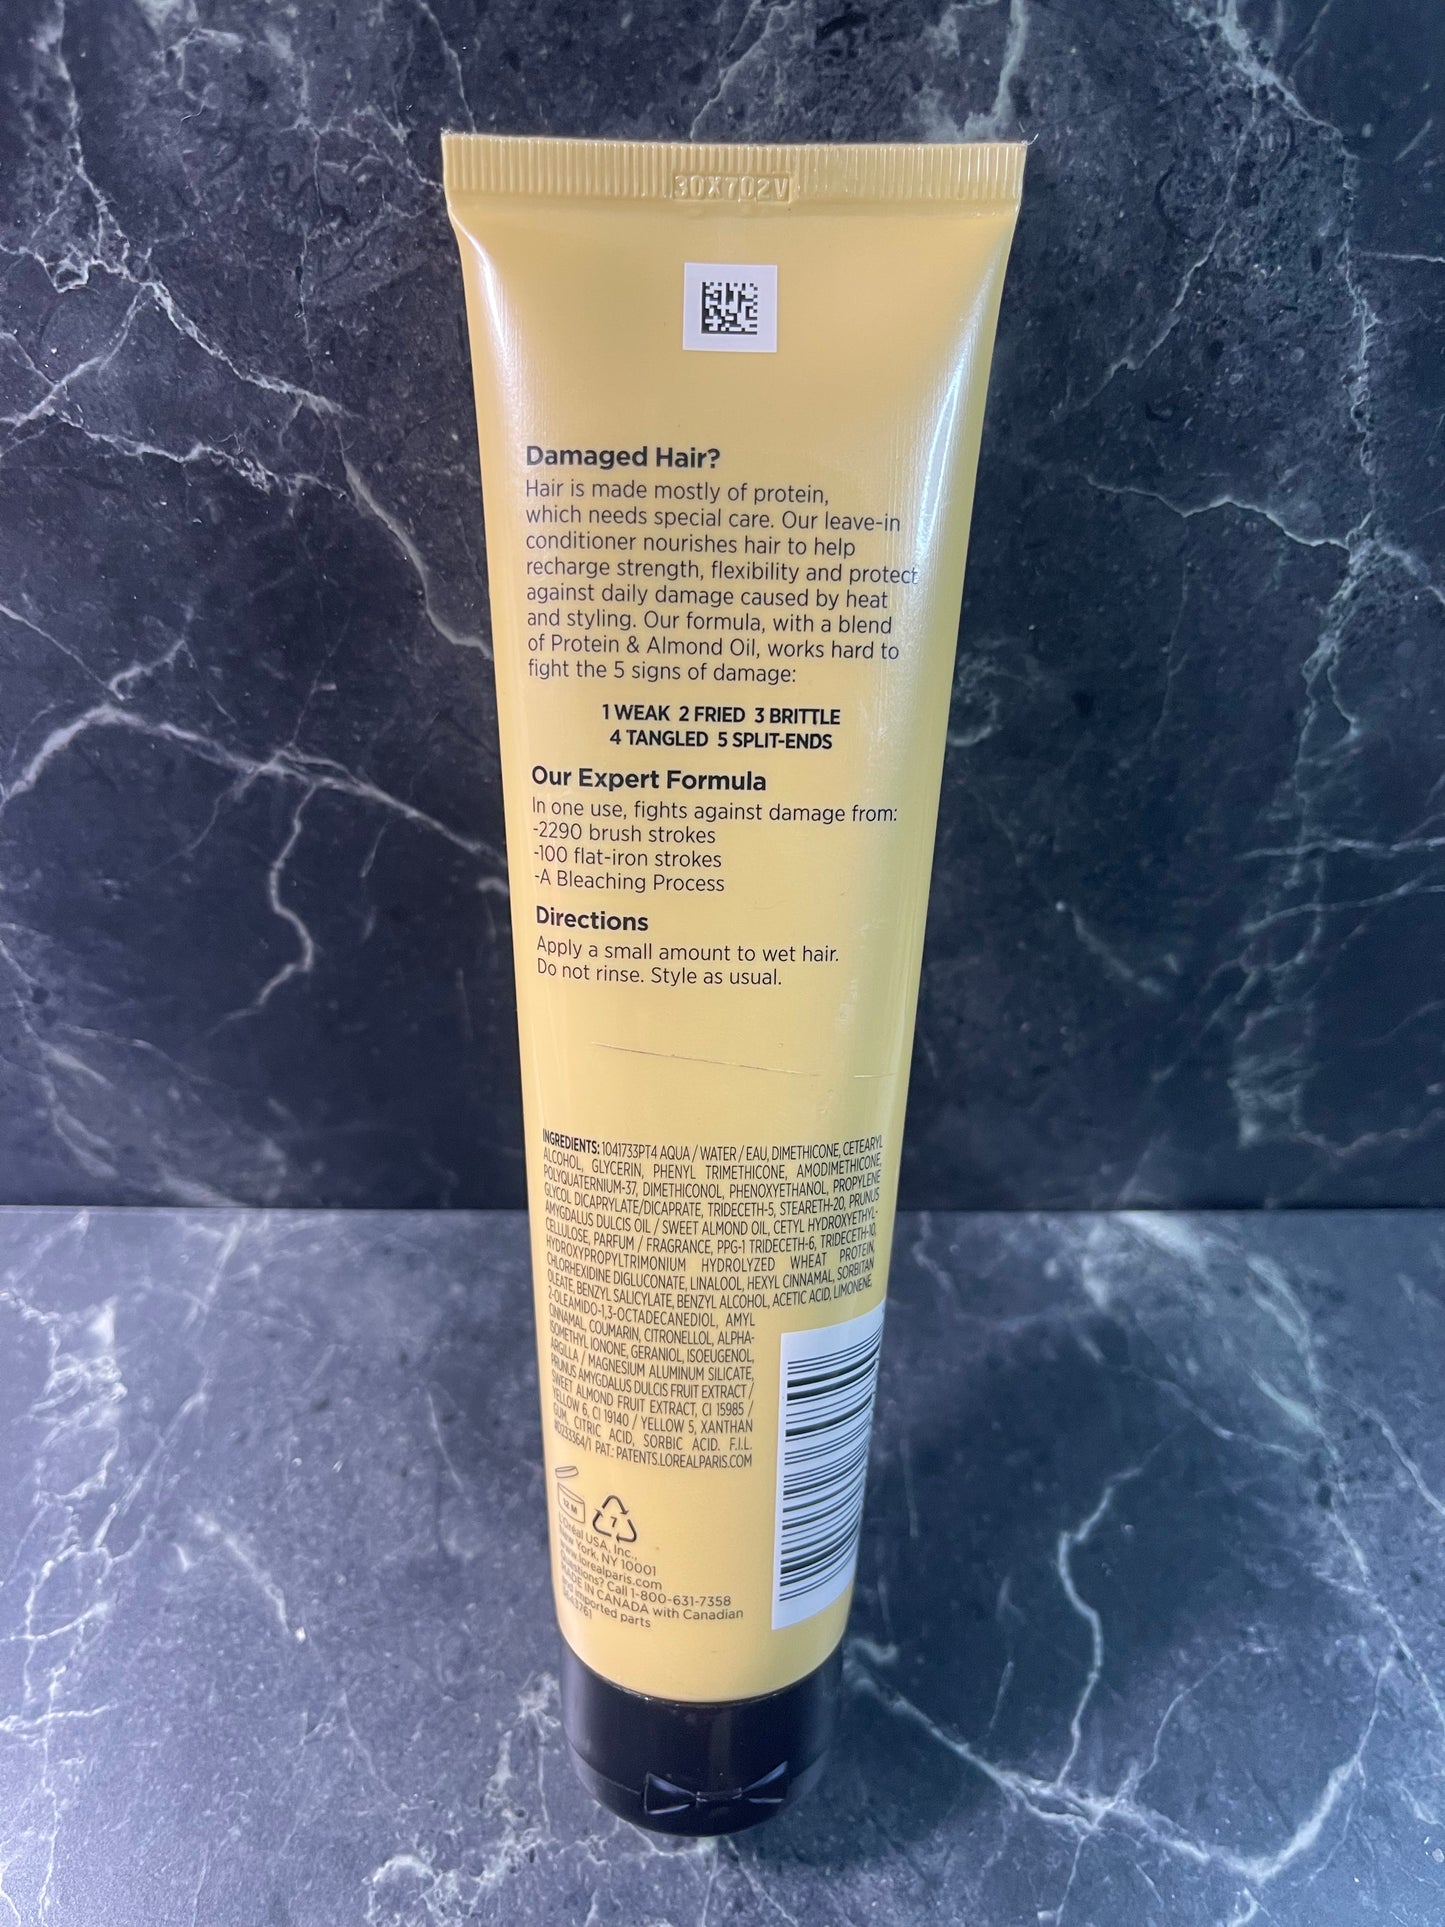 L'Oreal Elivie Total Repair 5 Protein Recharge Leave-In Conditioner - 2 pack